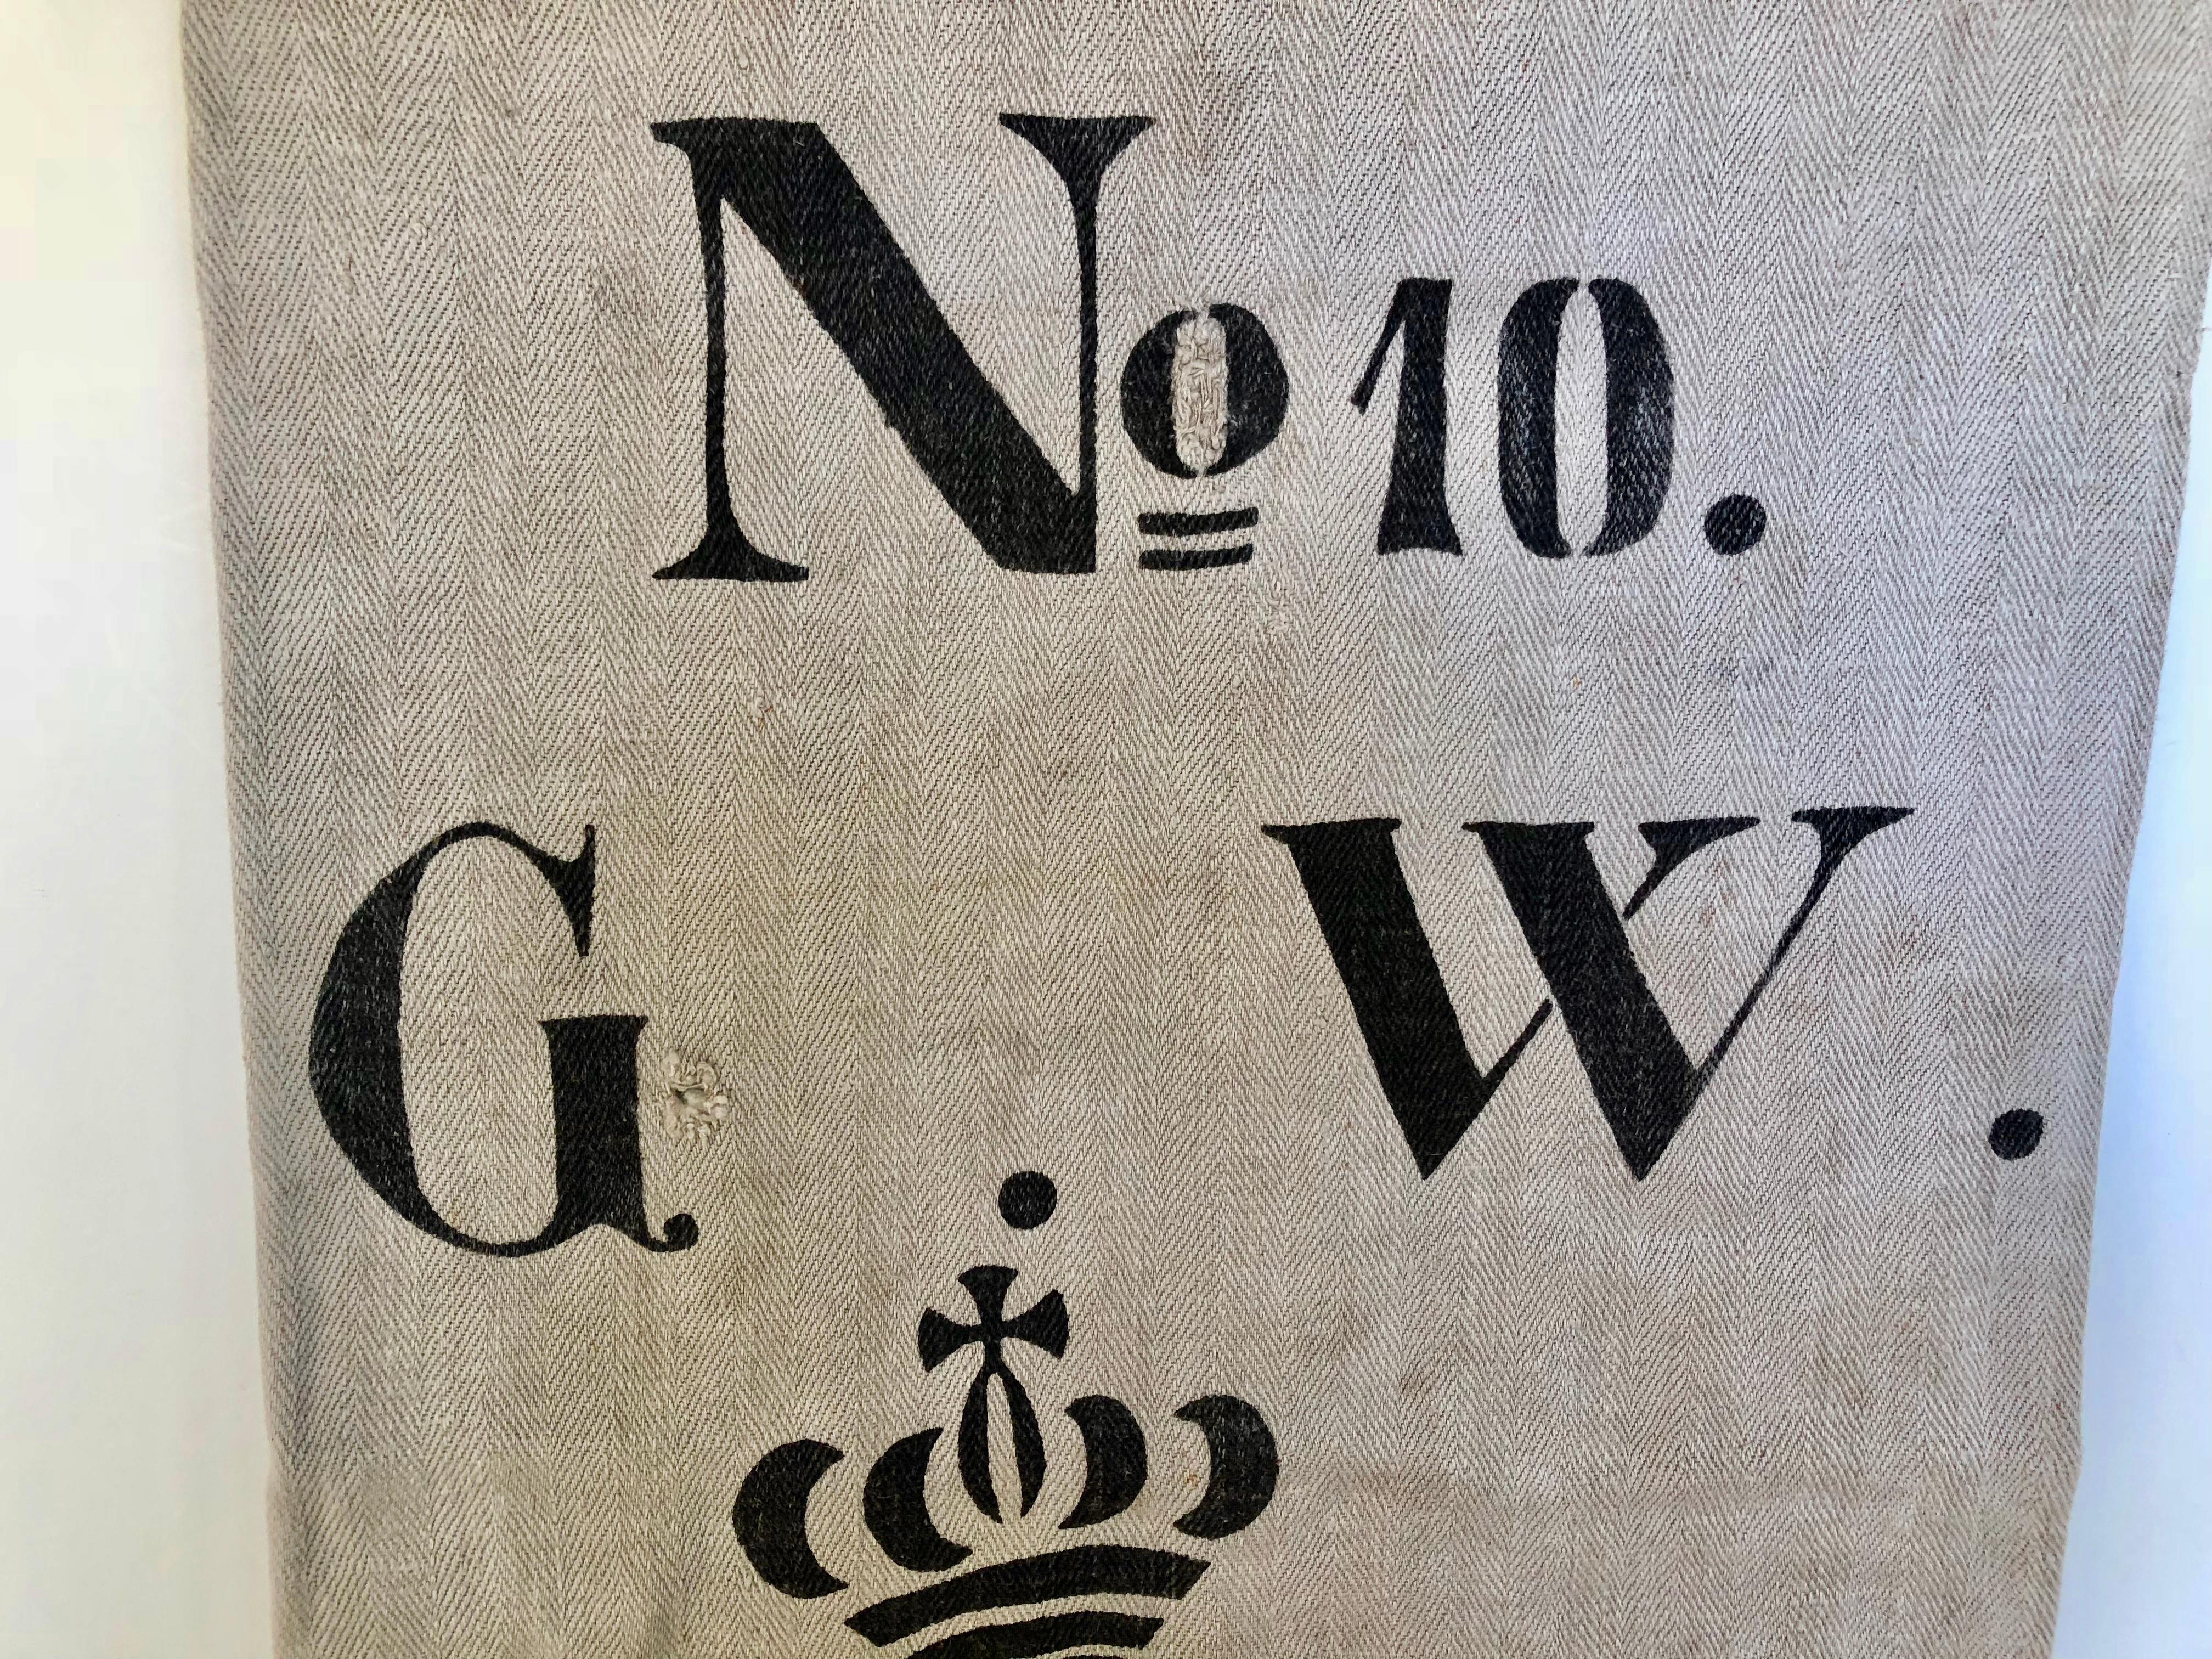 Early German handwoven grain sack with original calligraphy and graphics. It was made from linen and hemp by the farmer's wife and used to store grains. Initials identified the owner with original rare graphics and the inventory number stamped in